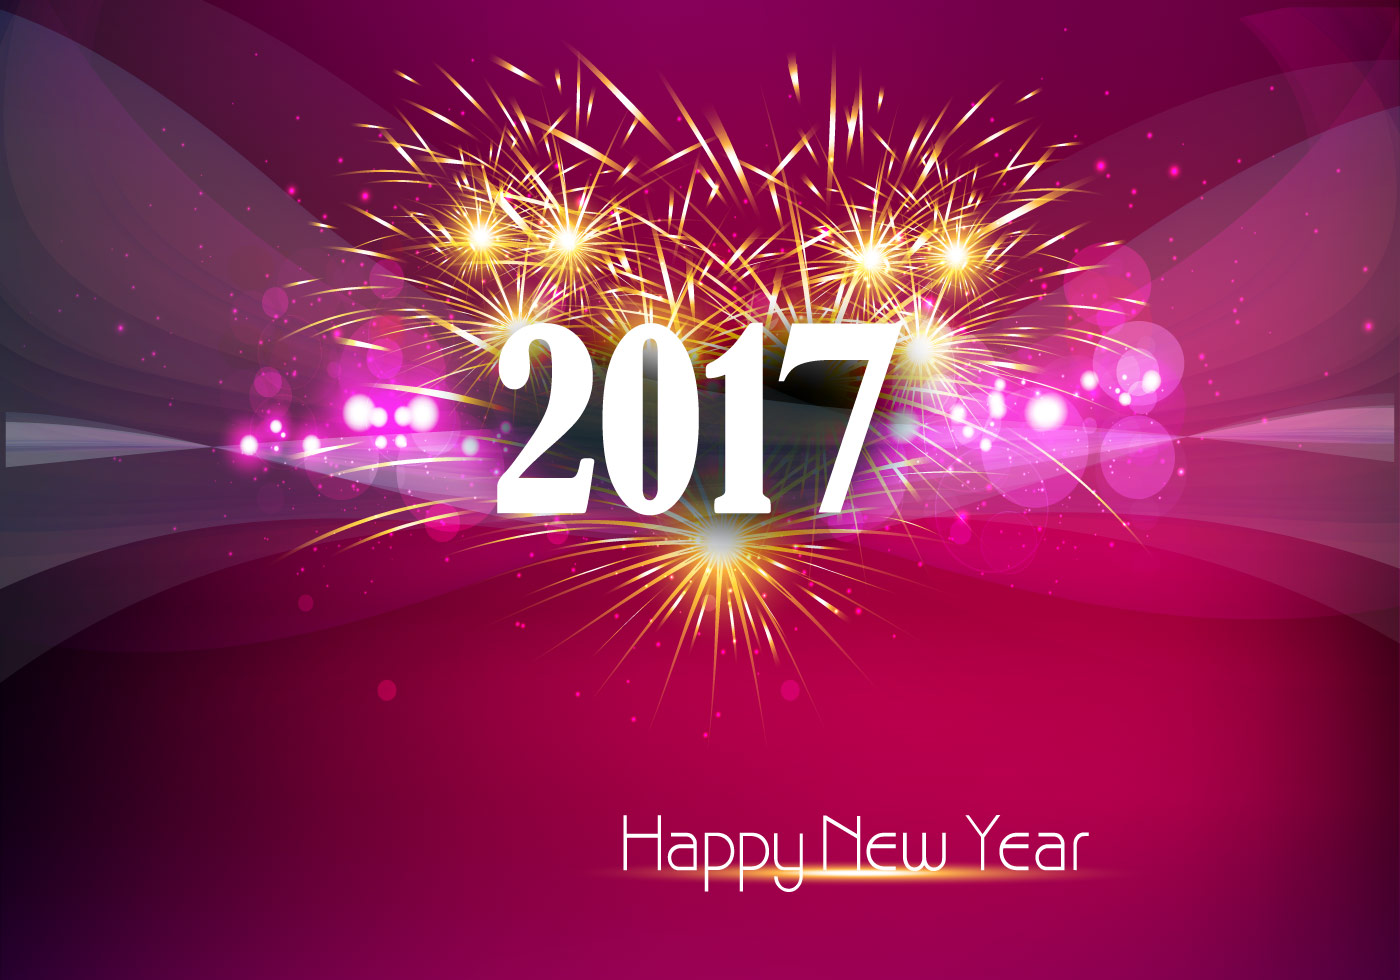 Happy New Year 2017 Banner With Fire Cracker - Download Free Vector ...